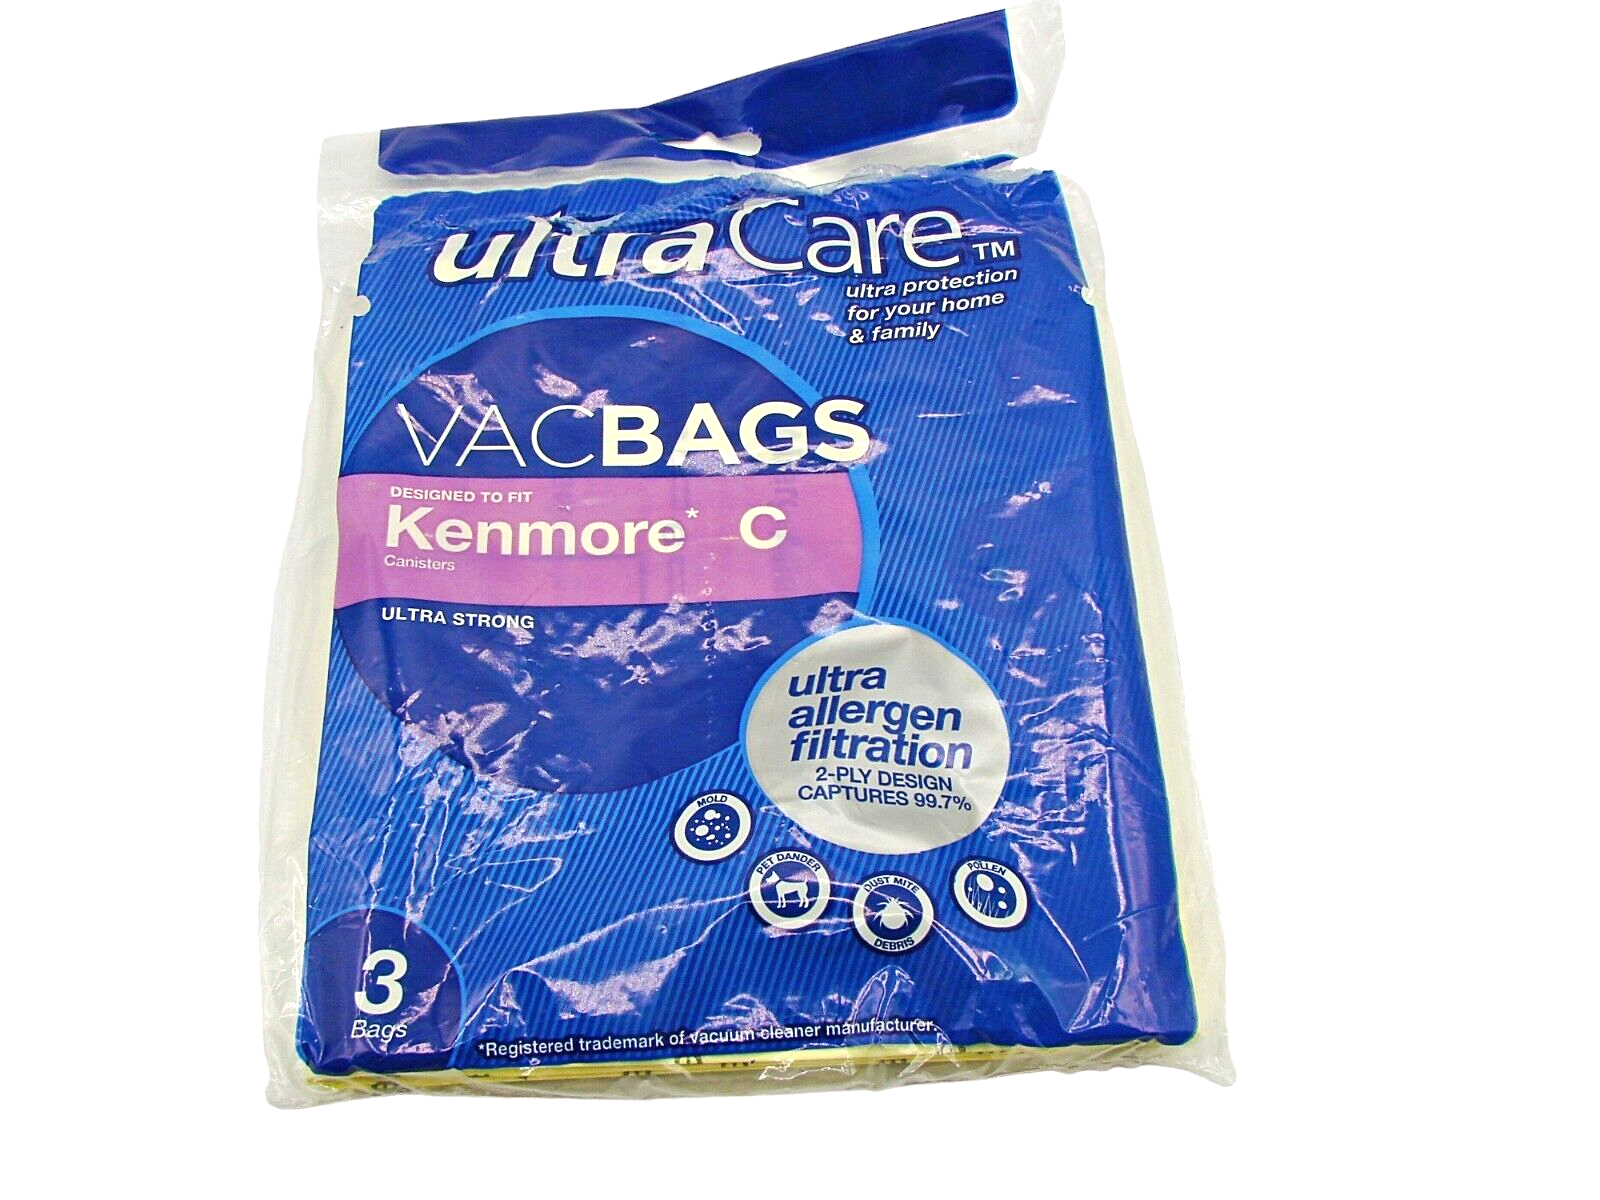 Set 2 Vacuum Bags UltraCare Ultra Allergen Filtration for Kenmore C 2 Ply NIOP - $7.82